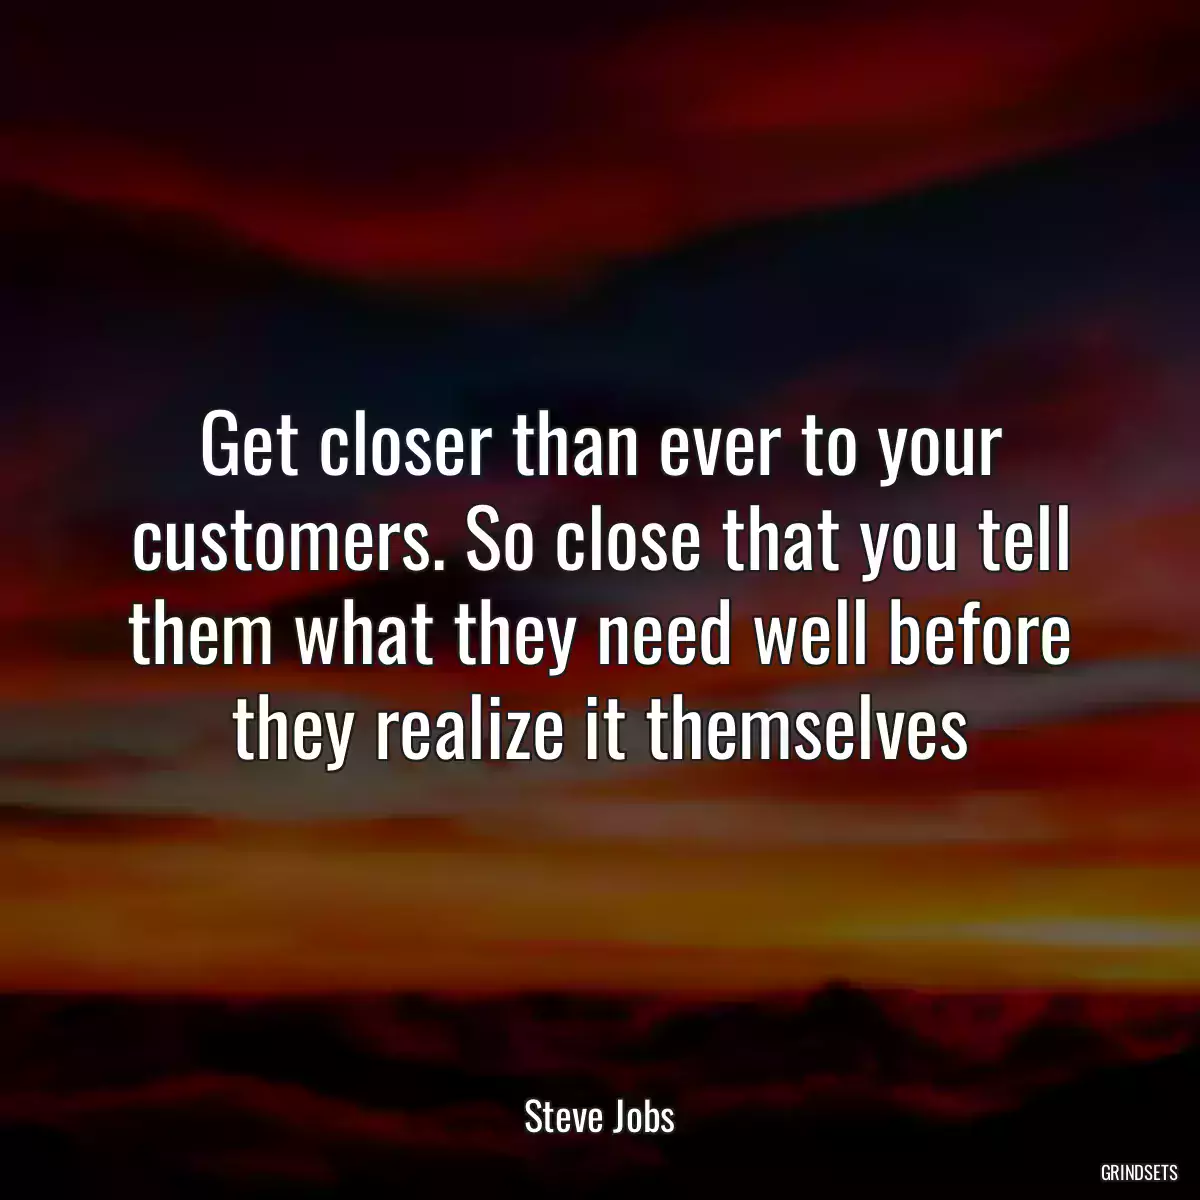 Get closer than ever to your customers. So close that you tell them what they need well before they realize it themselves